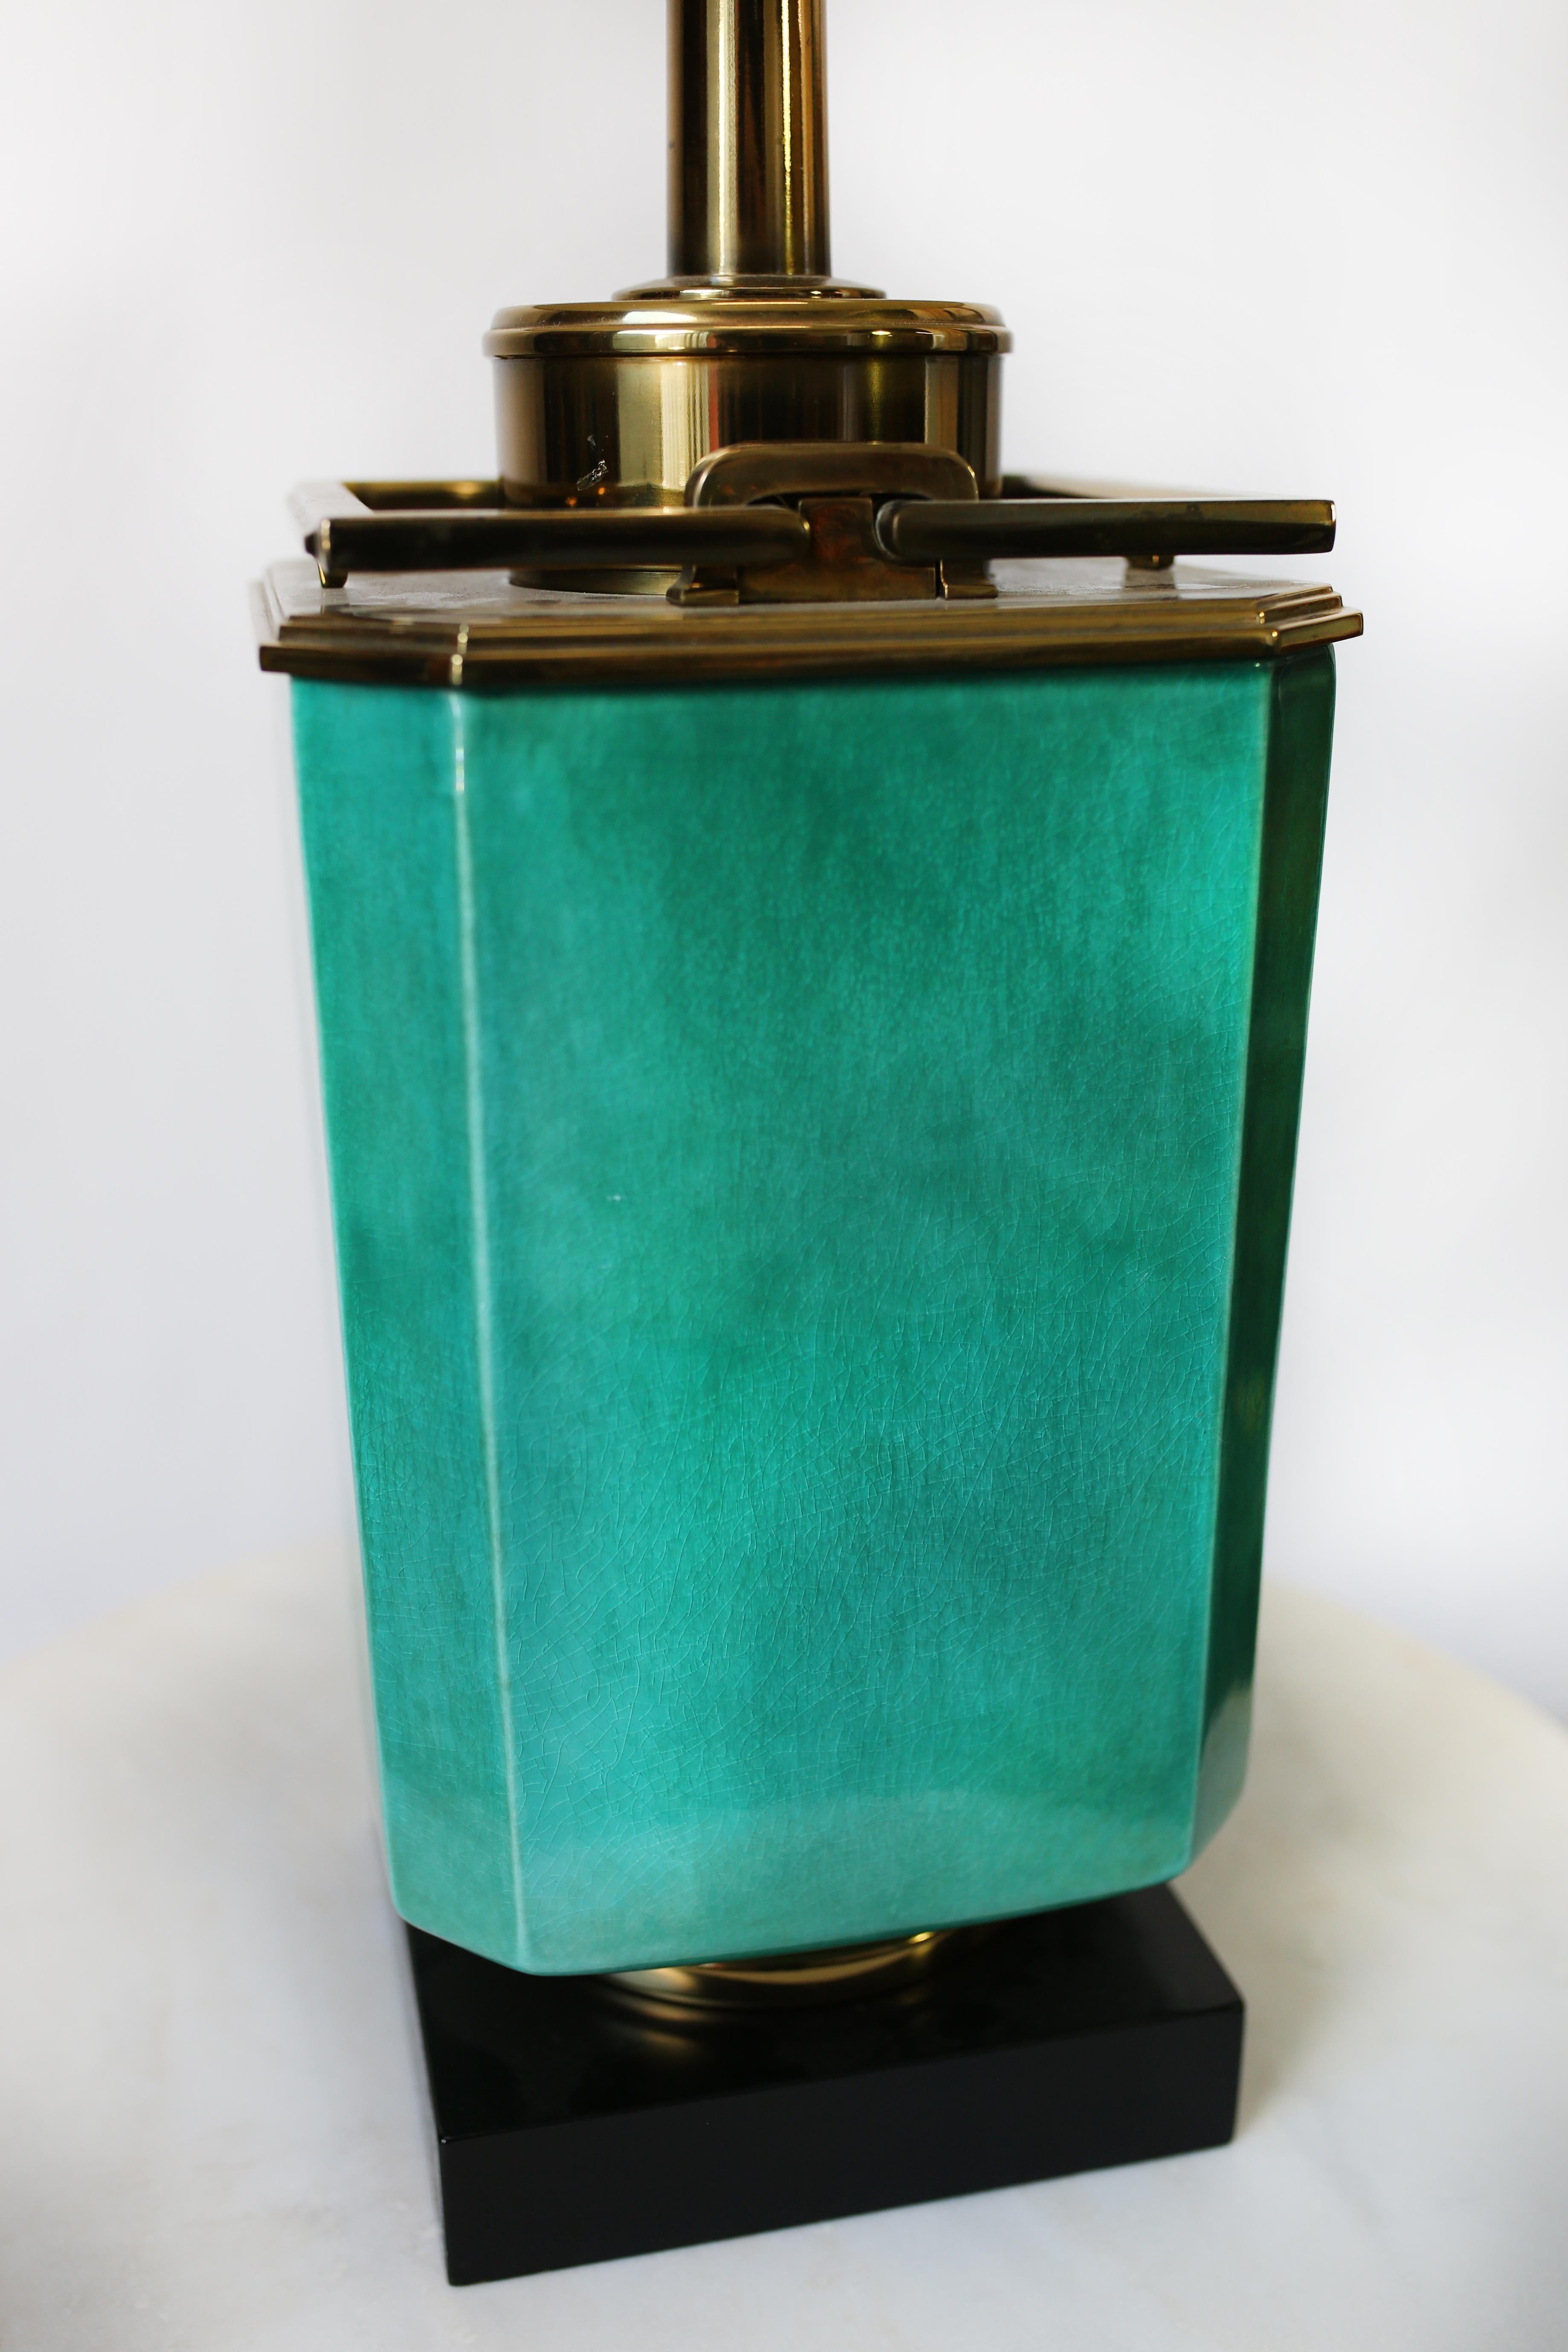 This turquoise and brass table lamp by Edwin Cole for Stiffel is in overall very good condition. Wear consistent with age and use. Beautiful aged brass hardware. Lamp shade included,
circa 1950s, USA.
Dimensions without the shade: D 9.5